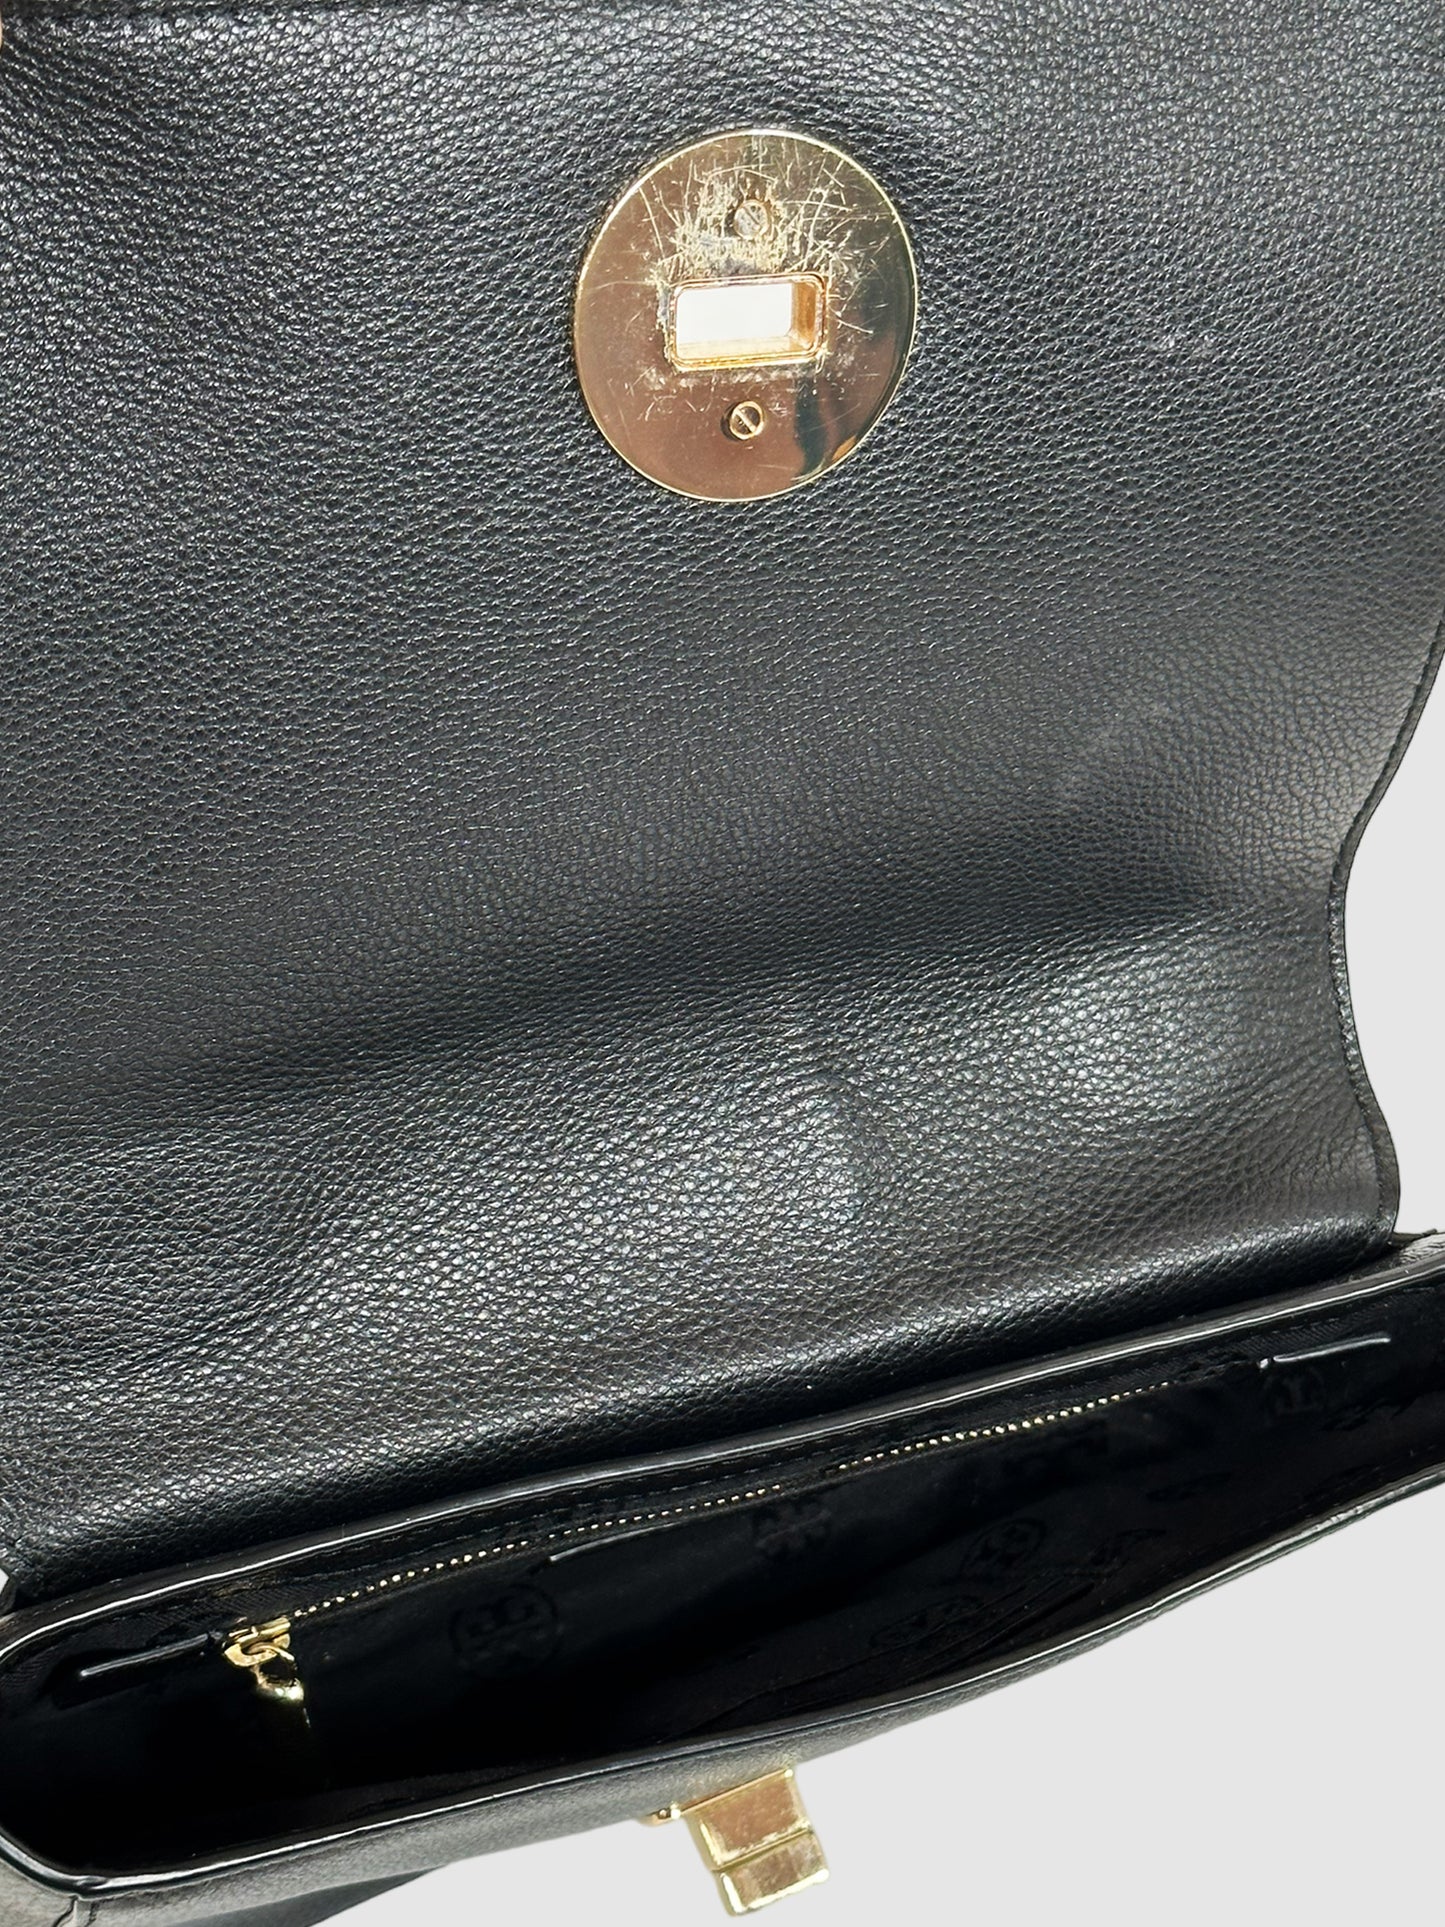 Tory Burch Carter Pebbled Leather Shoulder Bags